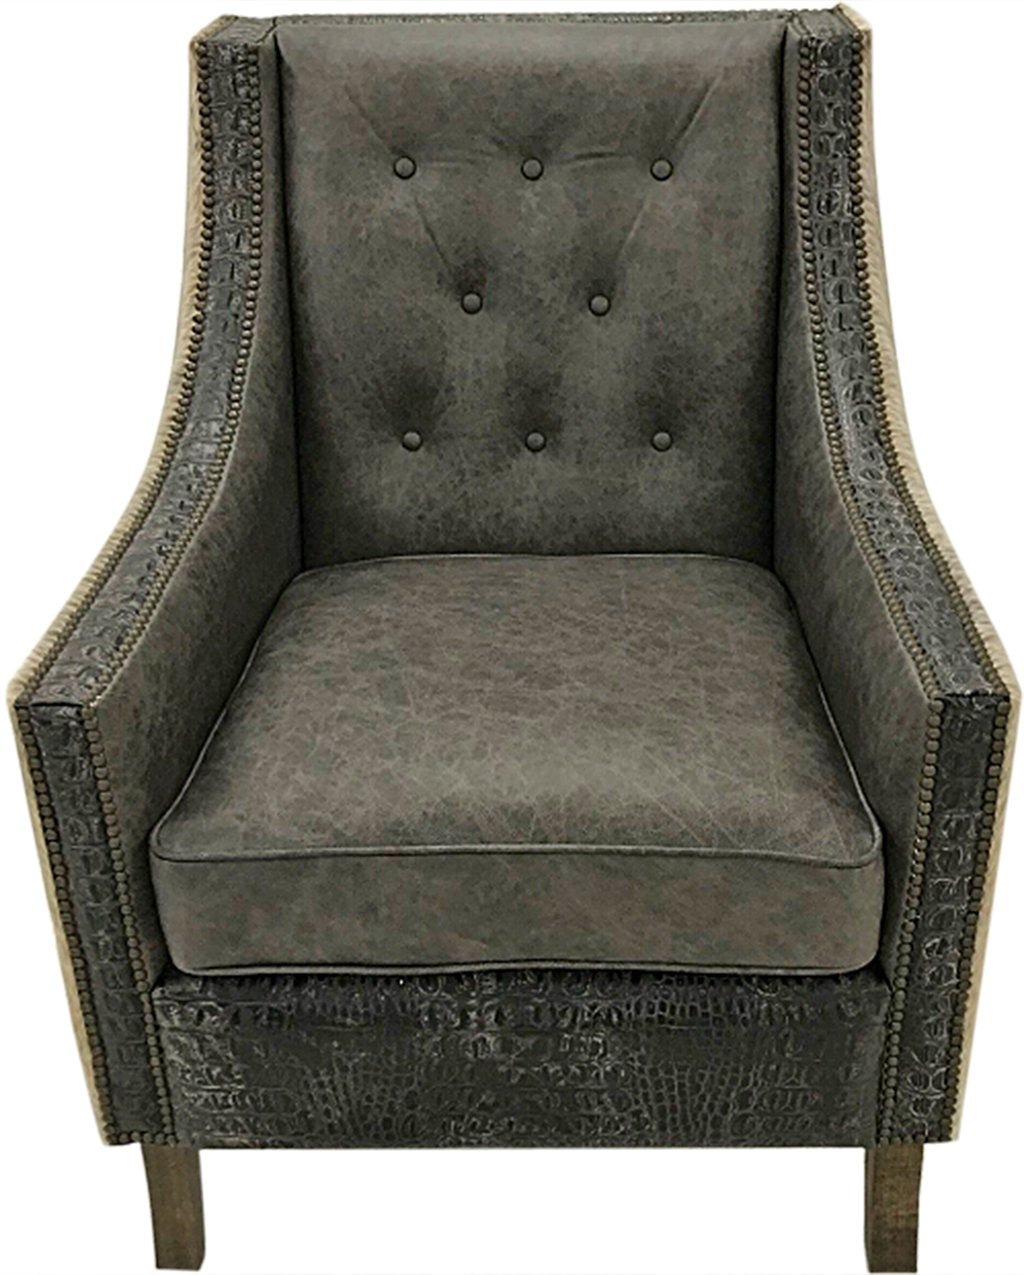 Aztec Tufted Lounge Chair